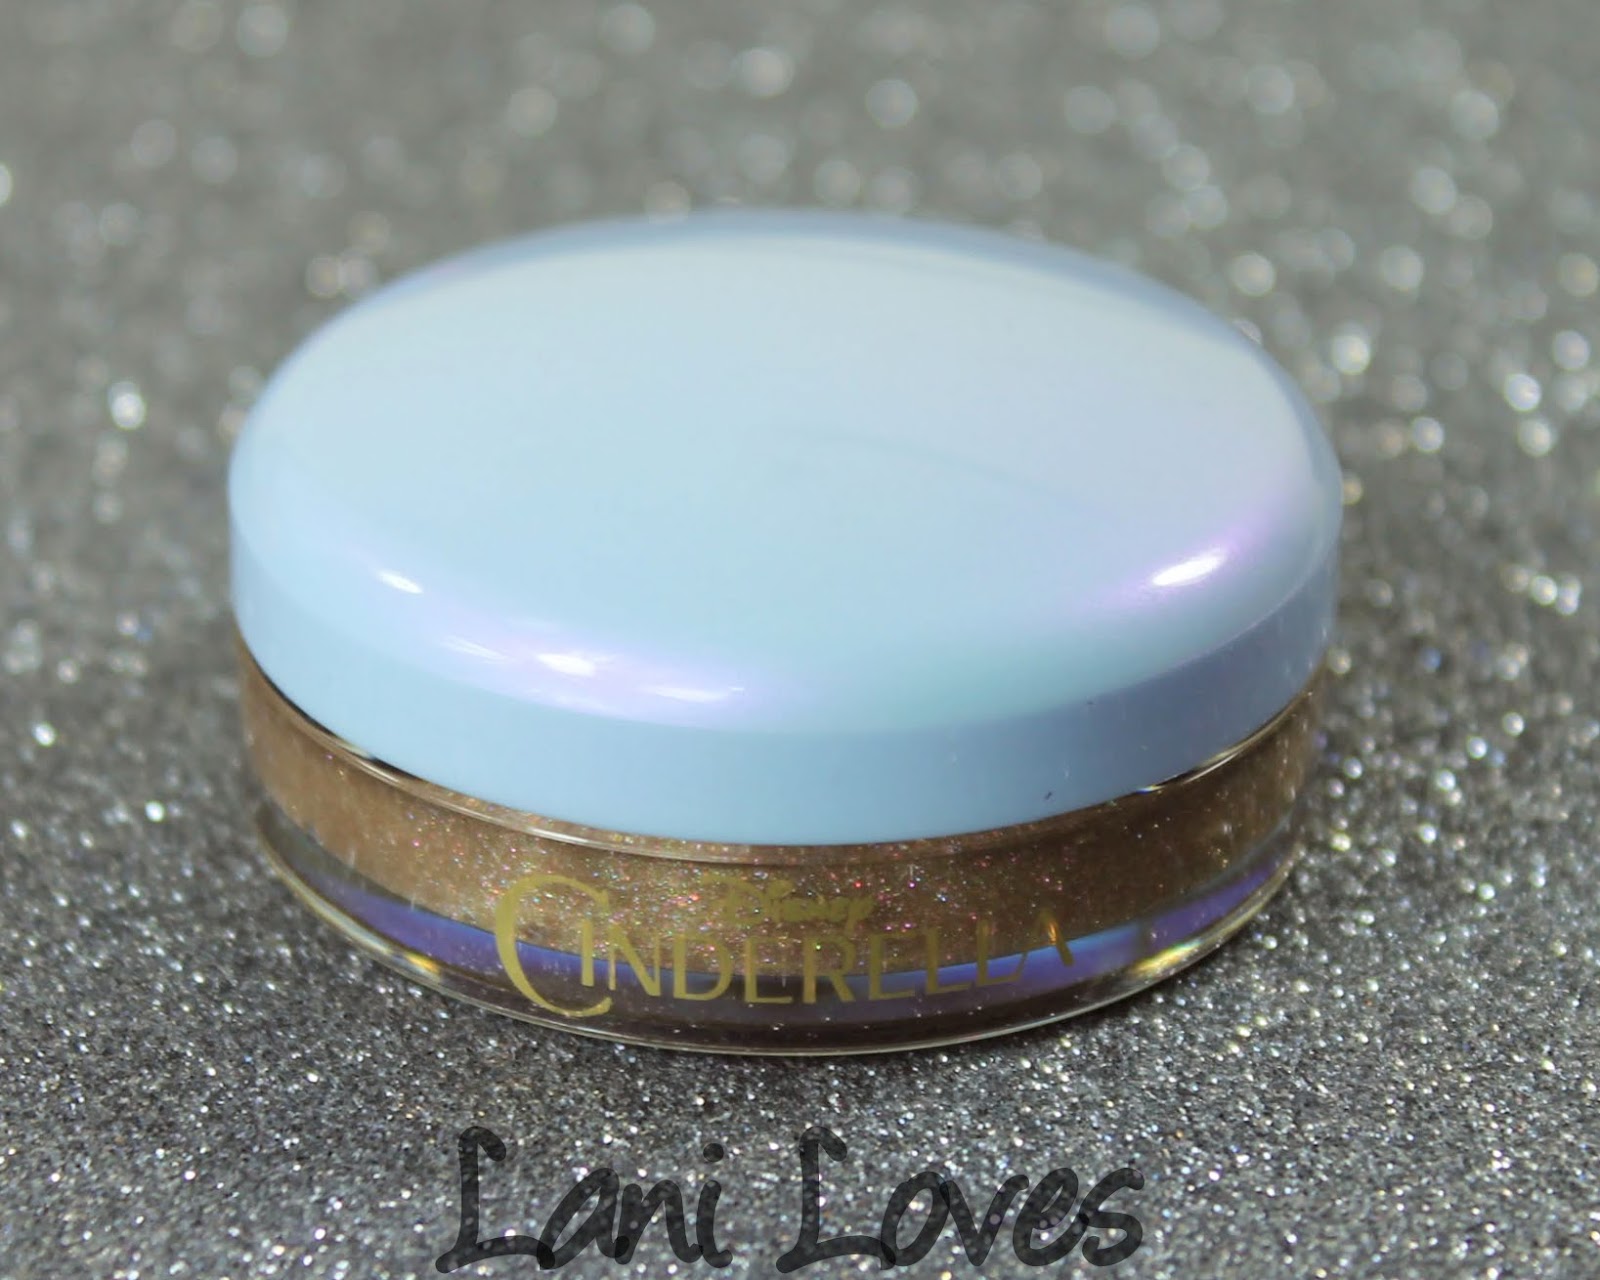 MAC Cinderella: Studio Eye Gloss - Lightly Tauped Swatches & Review